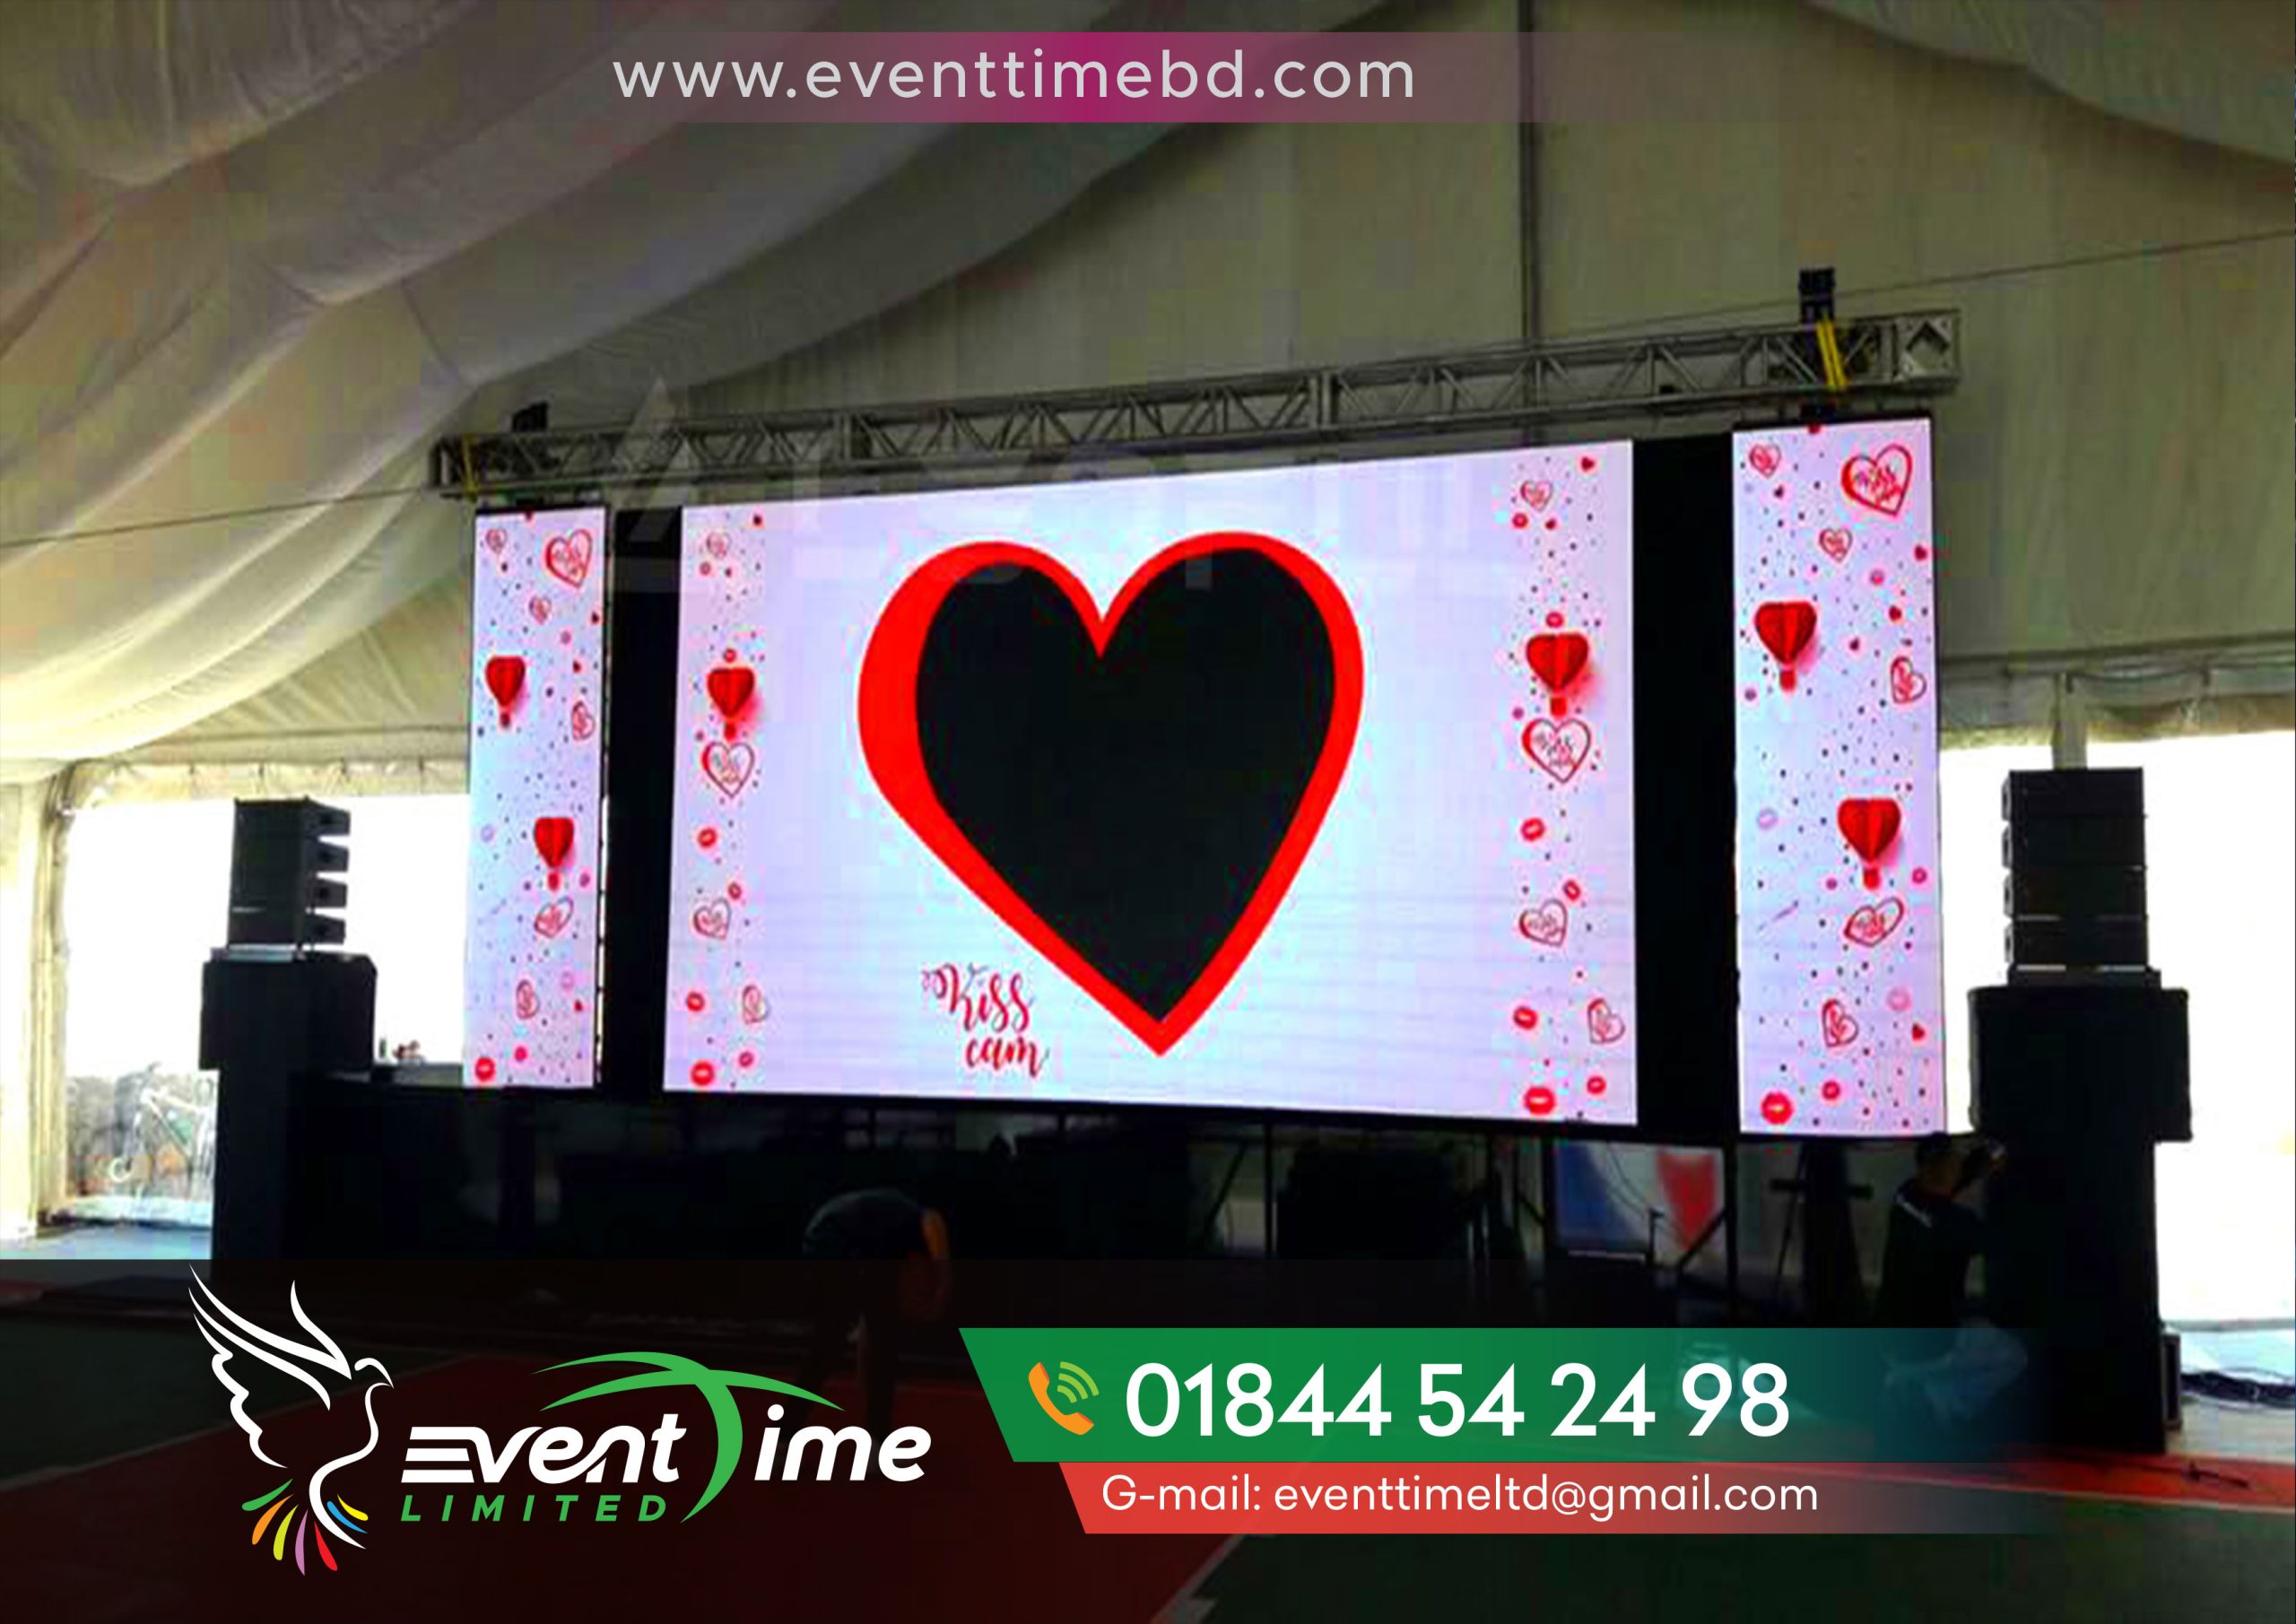 Best Event Rent Led Tv Screen Price in Bangladesh 2020-2023 Event Rent Led Screen Tv in Bangladesh’s company name is Event Time BD. Best LED Screen Rental. Best led screen rental in Bangladesh. Top LED Display Wall Rent in Bangladesh. Big LED Video Wall Screen Rental Dhaka. Best Top 10 LED Wall Screen Rental Event Companies. Rental led screen manufacturer pricing in Bangladesh. Brand New Rental led screen Manufacturer In Bd. Brand New Rental led screen Manufacturer In Bangladesh. Top 10 LED Scree display manufacturers. How to get Cheap Price Best LED Video Wall Display. Best Event LED Screen for Sharp & Clear Viewing. Top Best Full color Wall Mounted 12×10 LED Screen. Best Event Rent Led Tv Screen Price in Bangladesh 2020-2023 Led screen rental. Led wall rental. Rental display video wall. Led video wall rental. Rental led display. Flat screen tv rental. Video wall rental. Led screen rental near me. Led screens for events. Jumbotron rental. Led wall rental near me. Mobile led screen rental. Led screen hire. Led panel rental. Led rental screen. Video wall rental near me. Large led screen rental. Video wall rental cost. Hire video wall. Led wall for hire. Led display hire. Outdoor led screen rental. Indoor rental led display. Led wall rental cost. Outdoor rental led display. Led rental display. Lcd screen rental. Led rental near me. Led video wall rental near me. Led wall rental price. Led screen rental cost. Led display screen rental. Led screen event. Digital screen rental. Led video screen rental. Led screen rental price. Outdoor led screen rental near me. Led screen for stage rental. Led video wall rental cost. Screens for hire. Led screen truck rental. Indoor led screen rental. Mobile led screen rental near me. Led screen panels rental. Rental led display screen. Giant led screen rental. Led screens for events price. Led wall hire. Led video wall hire. Led screen hire for events. 8x12 led screen rental. Screen hire for events. Led screen for marriage rent. Led wall for rent near me. Tv screen hire. Led screen for rent near me. Led screen hire price. Outdoor led screen hire. Tv screen hire for events. P2 6 indoor rental led display. Led wall screen rental. Lcd screen hire. Led backdrop screen rental. Mobile led screen hire. P3 91 outdoor rental led display. Large screen hire. Big screen hire for events. Led screen hire near me. Led screen panel for rent. Led wall event. Led screen display rental. Stage led screen rental. Event led screen rental. P4 81 outdoor rental led display. Led display screen for rent. P5 outdoor rental led display. P3 91 indoor rental led display. Led panel rental price. Big led screen rental. Video display hire. Led stage screen rental. Indoor led screen hire. Outdoor tv screen hire. Indoor rental led screen. Led screen truck rental near me. Outdoor led display rental. Video wall hire cost. Led panel screen rental. Jumbotron rental cost. Led screen wall rental. Rent a led screen. Outdoor led screen rental price. P2 5 indoor rental led display. Digital display screen rental. Led screen rent price. Hire led video wall. Led screens for events rent. P3 91 indoor led screen. Led screen rental long beach. Outdoor tv screen hire prices. Large led screen hire. Video screen hire. Digital display rental. Outdoor rental led screen. Led display rental company. Large tv screen hire. Led rental screen price. Stage screen rental. Rental outdoor led display. Outdoor video wall rental. Led screen rental high point. Large outdoor led screen for hire. Led wall display rental. Led board rental. Led display board rental. Lcd tv hire. Led screen p2 97. Led video wall rental price. Led display for rent. Led projector hire. Video wall rental price. Mobile led truck rental. Giant screen hire. Hire a tv screen. Hire flat screen tv. Big screen hire price. Display screen hire. Led screen rental company. Digital display hire. Transparent led screen rental. Outdoor led screen for rent. Led display board for rent. P4 indoor rental led display. Led screen hire cost. Led outdoor screen rental. Big tv screen hire. Led trailer screen hire. Rent video wall displays. Outdoor led rental. Led screen hire events ltd. P3 91 rental led display. Led video wall hire cost. Big screens for hire. Big screen hire events. Stage rental led screen. Mobile led screen rental cost. Large video screen rental. Jumbotron rental prices. Jumbotron screen rentals. Led video screen hire. Led video panel rental. Screens to hire. Portable led screen rental. Led video curtain rental. Led wall rental company. Hd rental led display. Large video wall rental. Smd screen rental. Led wall rental. Rental display video wall. Led video wall rental. Led screen rental price list. Video wall rental. Led wall rental near me. Led rental screen. Led wall rental price. 8x12 led screen rental. Led screen rental cost. Video wall rental near me. Led display screen rental. Video wall rental cost. Led wall screen rental. Led backdrop screen rental. Stage led screen rental. Led video screen rental. Led screen rental price. Led screen for stage rental. Led panel rental price. Led panel screen rental. Outdoor led screen rental price. Led screen for rental. Rental led screen manufacturer. Rental led display manufacturer. Best Top 10 LED Wall Screen Rental Event Companies Are you planning an event in Bangladesh and looking to create a captivating visual experience for your audience? Look no further than Event Time BD, a premier company specializing in LED screen TV rentals. With an extensive range of LED screens and professional services, Event Time BD is your go-to solution for all your event’s visual needs. When it comes to event planning, the right visual elements can significantly enhance the overall atmosphere. Best Event Rent Led Tv Screen Price in Bangladesh 2020-2023 Best Event Rent Led Tv Screen Price in Bangladesh 2020-2023 LED screen rentals provide a dynamic and immersive experience for your audience, elevating your event to the next level. With Event Time BD, you can access state-of-the-art LED screens that deliver high-resolution visuals, vibrant colors, and exceptional clarity. For events that require larger-than-life visuals, LED wall rentals offer a stunning visual backdrop that captivates your audience. Whether it’s a corporate conference, concert, or wedding reception, Event Time BD provides LED wall rentals that can transform any venue into a captivating visual spectacle. How to get Cheap Price Best LED Video Wall Display 2023 Best LED Display Video walls are a powerful tool for showcasing dynamic content and captivating your audience’s attention. Event Time BD offers versatile video wall rentals that allow you to display engaging visuals, promotional videos, live feeds, and more. With customizable configurations and seamless integration, you can create an impactful visual experience tailored to your event. Event Time BD understands the importance of convenience when planning an event. With rental LED displays, you can enjoy hassle-free setup, professional support, and flexible rental durations. Whether you need a single LED display or a comprehensive setup, Event Time BD has the expertise and equipment to meet your requirements. Best Event Rent Led Tv Screen Price in Bangladesh 2020-2023 Flat screen TVs provide a sleek and modern visual solution for events of any scale. Event Time BD offers a wide selection of flat screen TV rentals, ranging in sizes to suit your specific needs. From trade shows to private functions, these flat screen TVs deliver crystal-clear visuals and seamless integration with other event elements. Event Time BD are perfect for outdoor events, sports gatherings, and large-scale productions. Event Time BD’s rentals ensure that every person in the crowd has a front-row view of the action. With high-definition displays and impressive visibility, Event Time BD create an immersive experience that engages your audience. Best Rental led screen manufacturer pricing in Bangladesh Mobile LED screen rentals provide the ideal solution when your event requires mobility and flexibility. Event Time BD‘s mobile LED screens are easily transportable, allowing you to set up captivating visuals at multiple locations. Whether it’s a promotional campaign, roadshow, or outdoor festival, these mobile LED screens ensure your message reaches your target audience. LED panel rentals offer versatility and customization, allowing you to create unique visual setups tailored to your event. Event Time BD provides LED panel rentals in various sizes, enabling you to design captivating displays and stage backdrops. With the ability to showcase high-resolution images and videos, LED panels add a touch of sophistication to any event. Best Event Rent Led Tv Screen Price in Bangladesh 2020-2023 Best Event Rent Led Tv Screen Price in Bangladesh 2020-2023 When it comes to LED rental screens, Event Time BD prioritizes quality and performance. Their LED screens are meticulously maintained, ensuring optimal brightness, color accuracy, and reliability. With their commitment to excellence, Event Time BD guarantees that your event will make a lasting impression on your audience. Outdoor events require durable and weather-resistant solutions. Event Time BD’s outdoor LED screen rentals are designed to withstand the elements while delivering stunning visuals. From music festivals to outdoor exhibitions, these LED screens provide high visibility, even in bright sunlight, ensuring your content shines through. Help